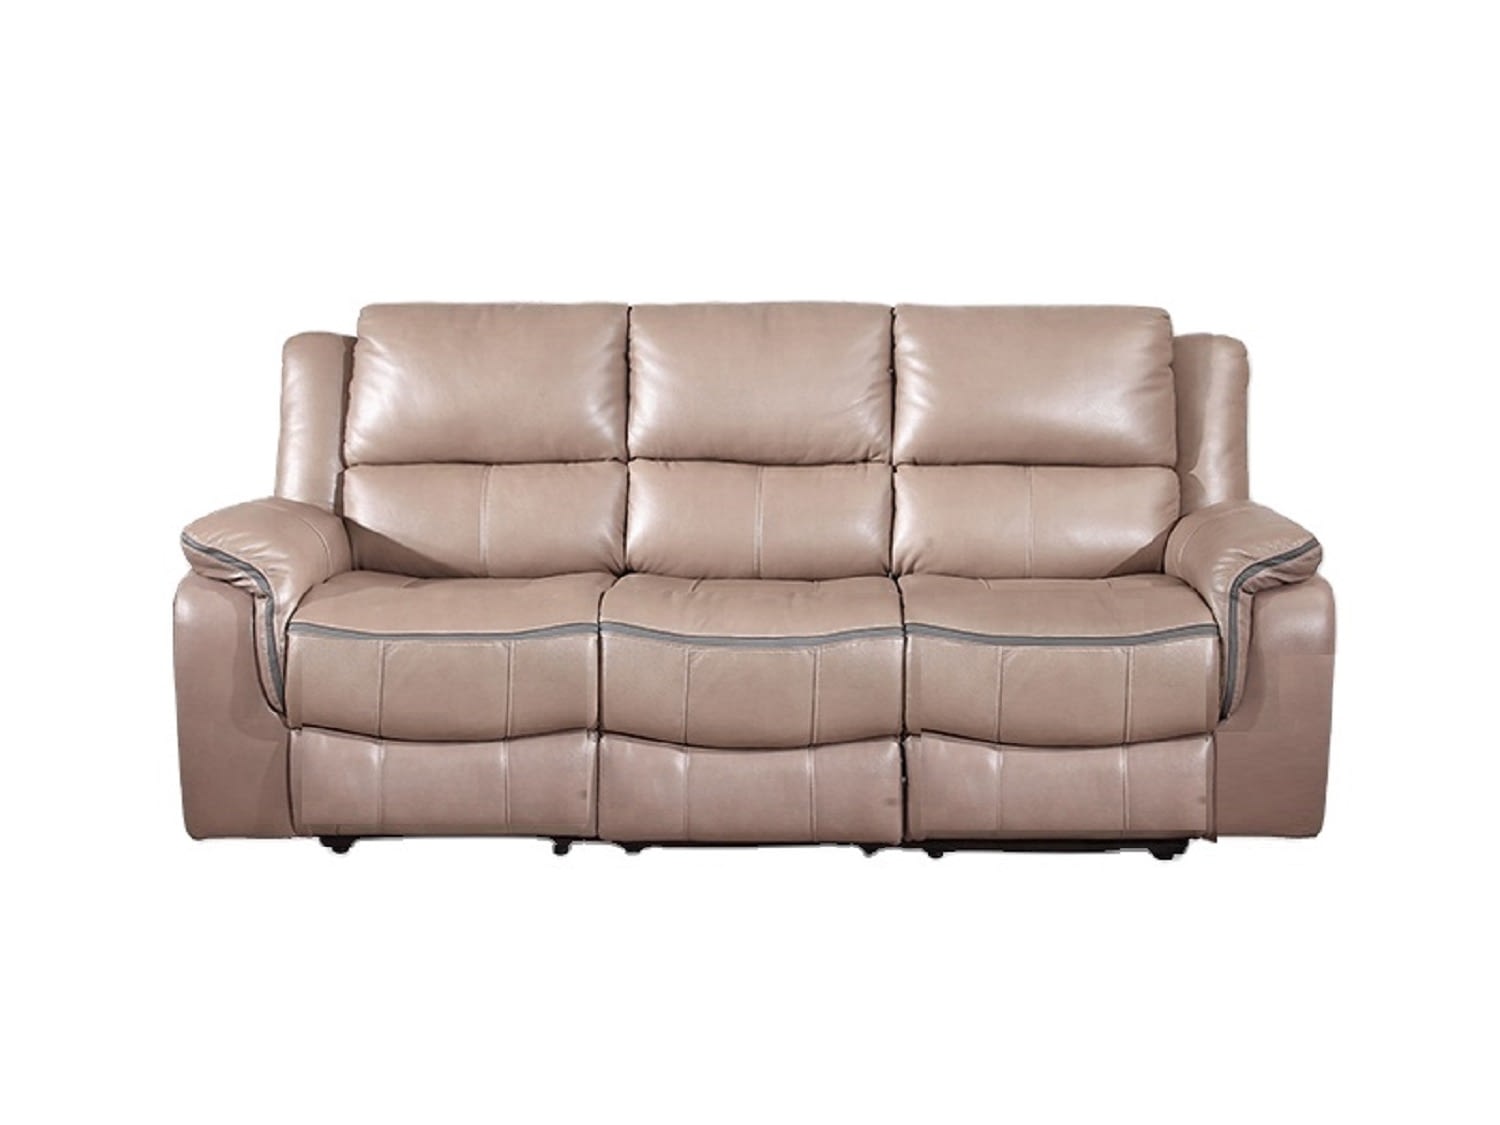 SONNA Leather Reclining Sofa - Zoom